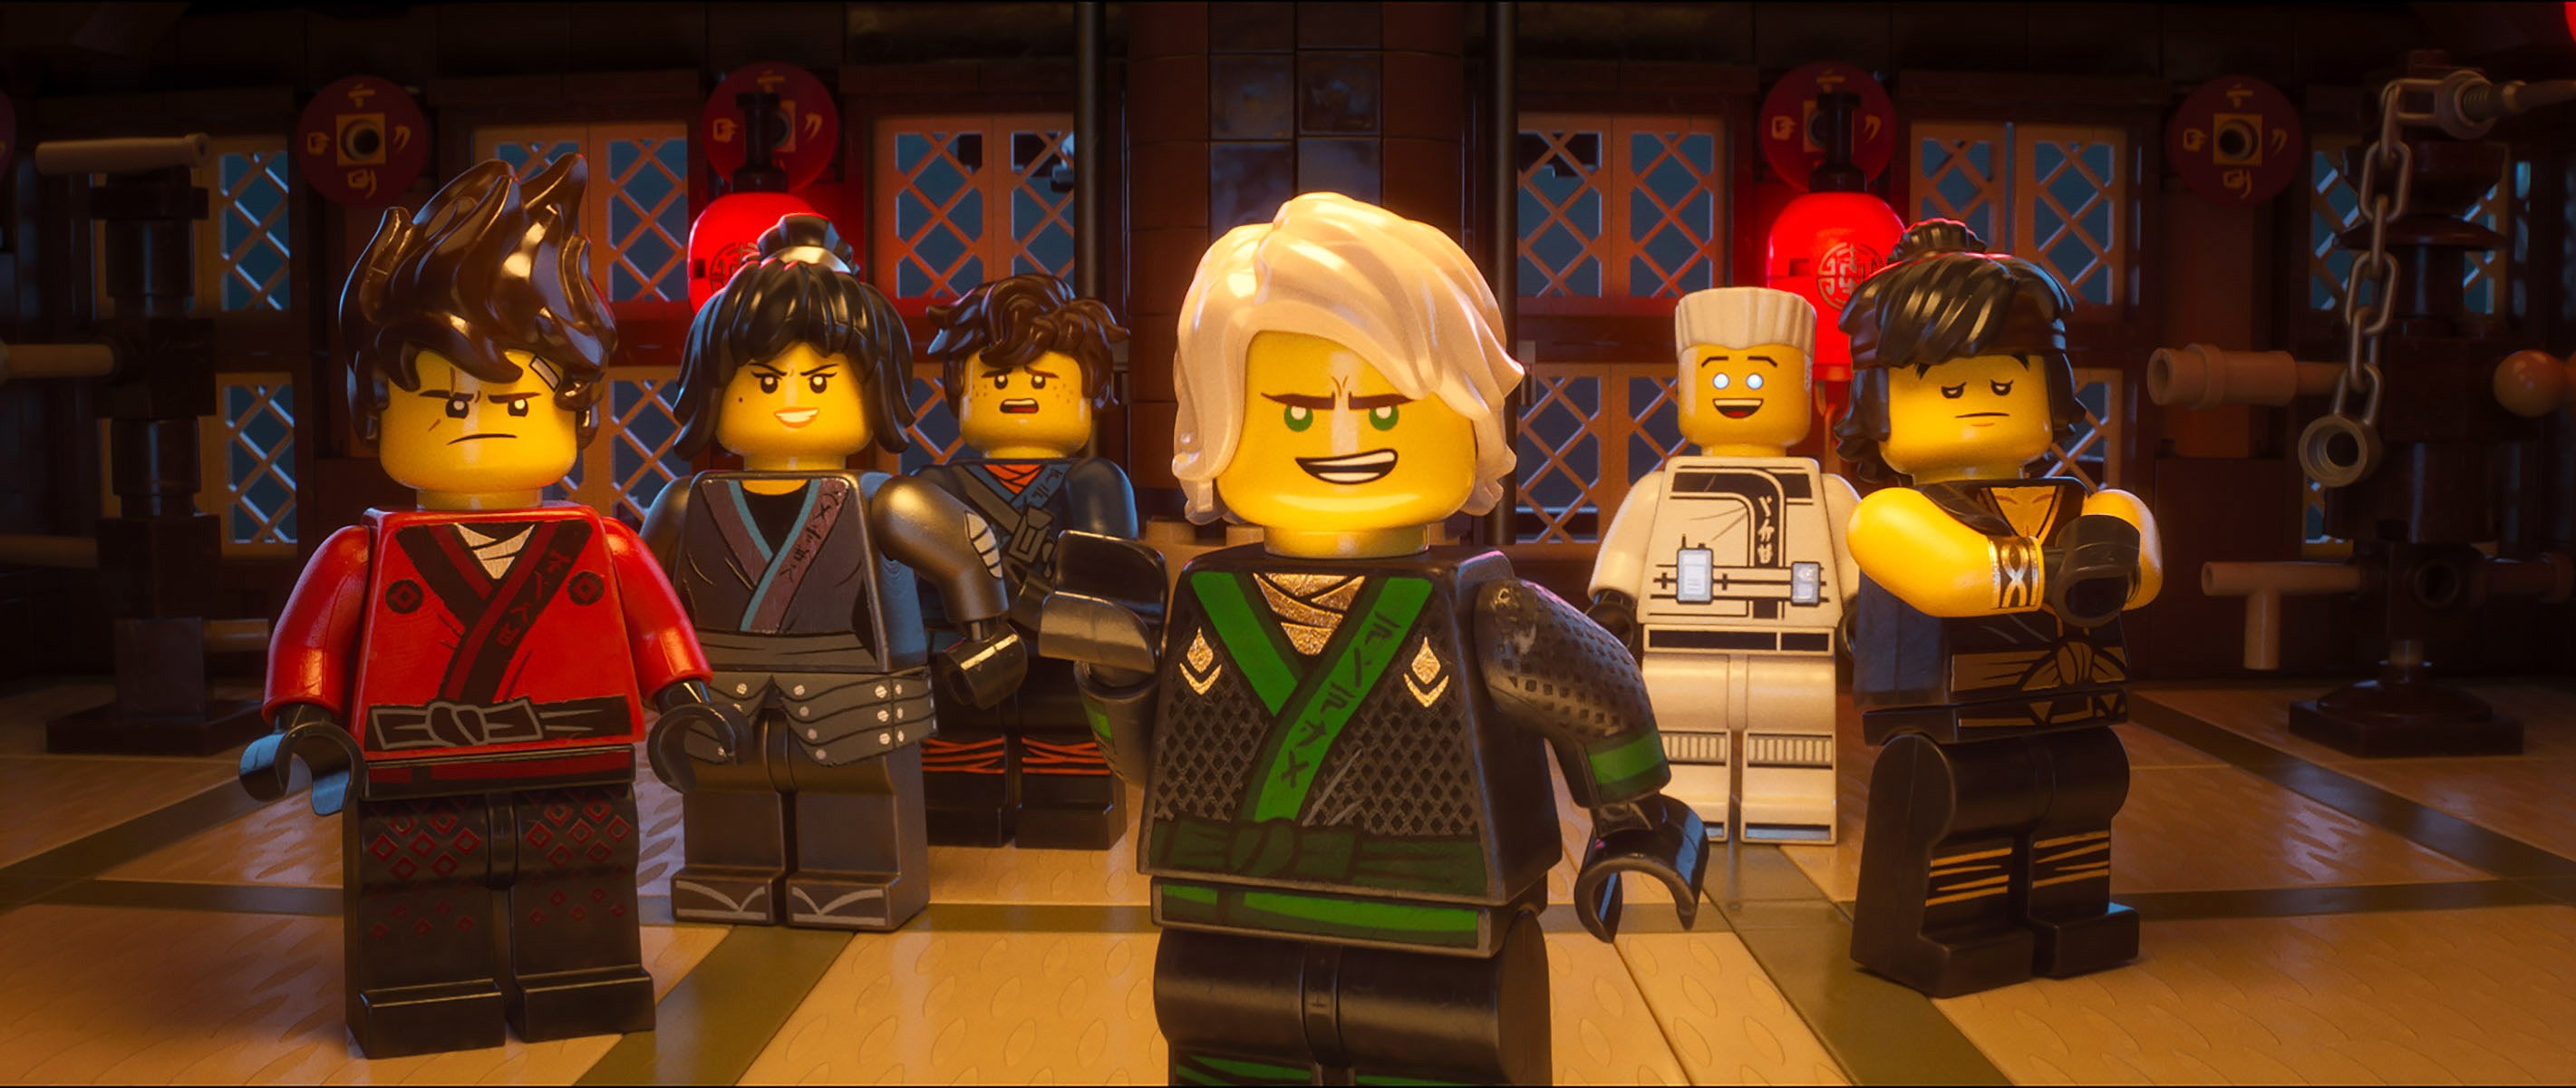 Movie Review for the new animated family fantasy THE LEGO NINJAGO MOVIE, now playing in theatres. | Movie Review for the new animated family fantasy THE LEGO NINJAGO MOVIE, now playing in theatres.